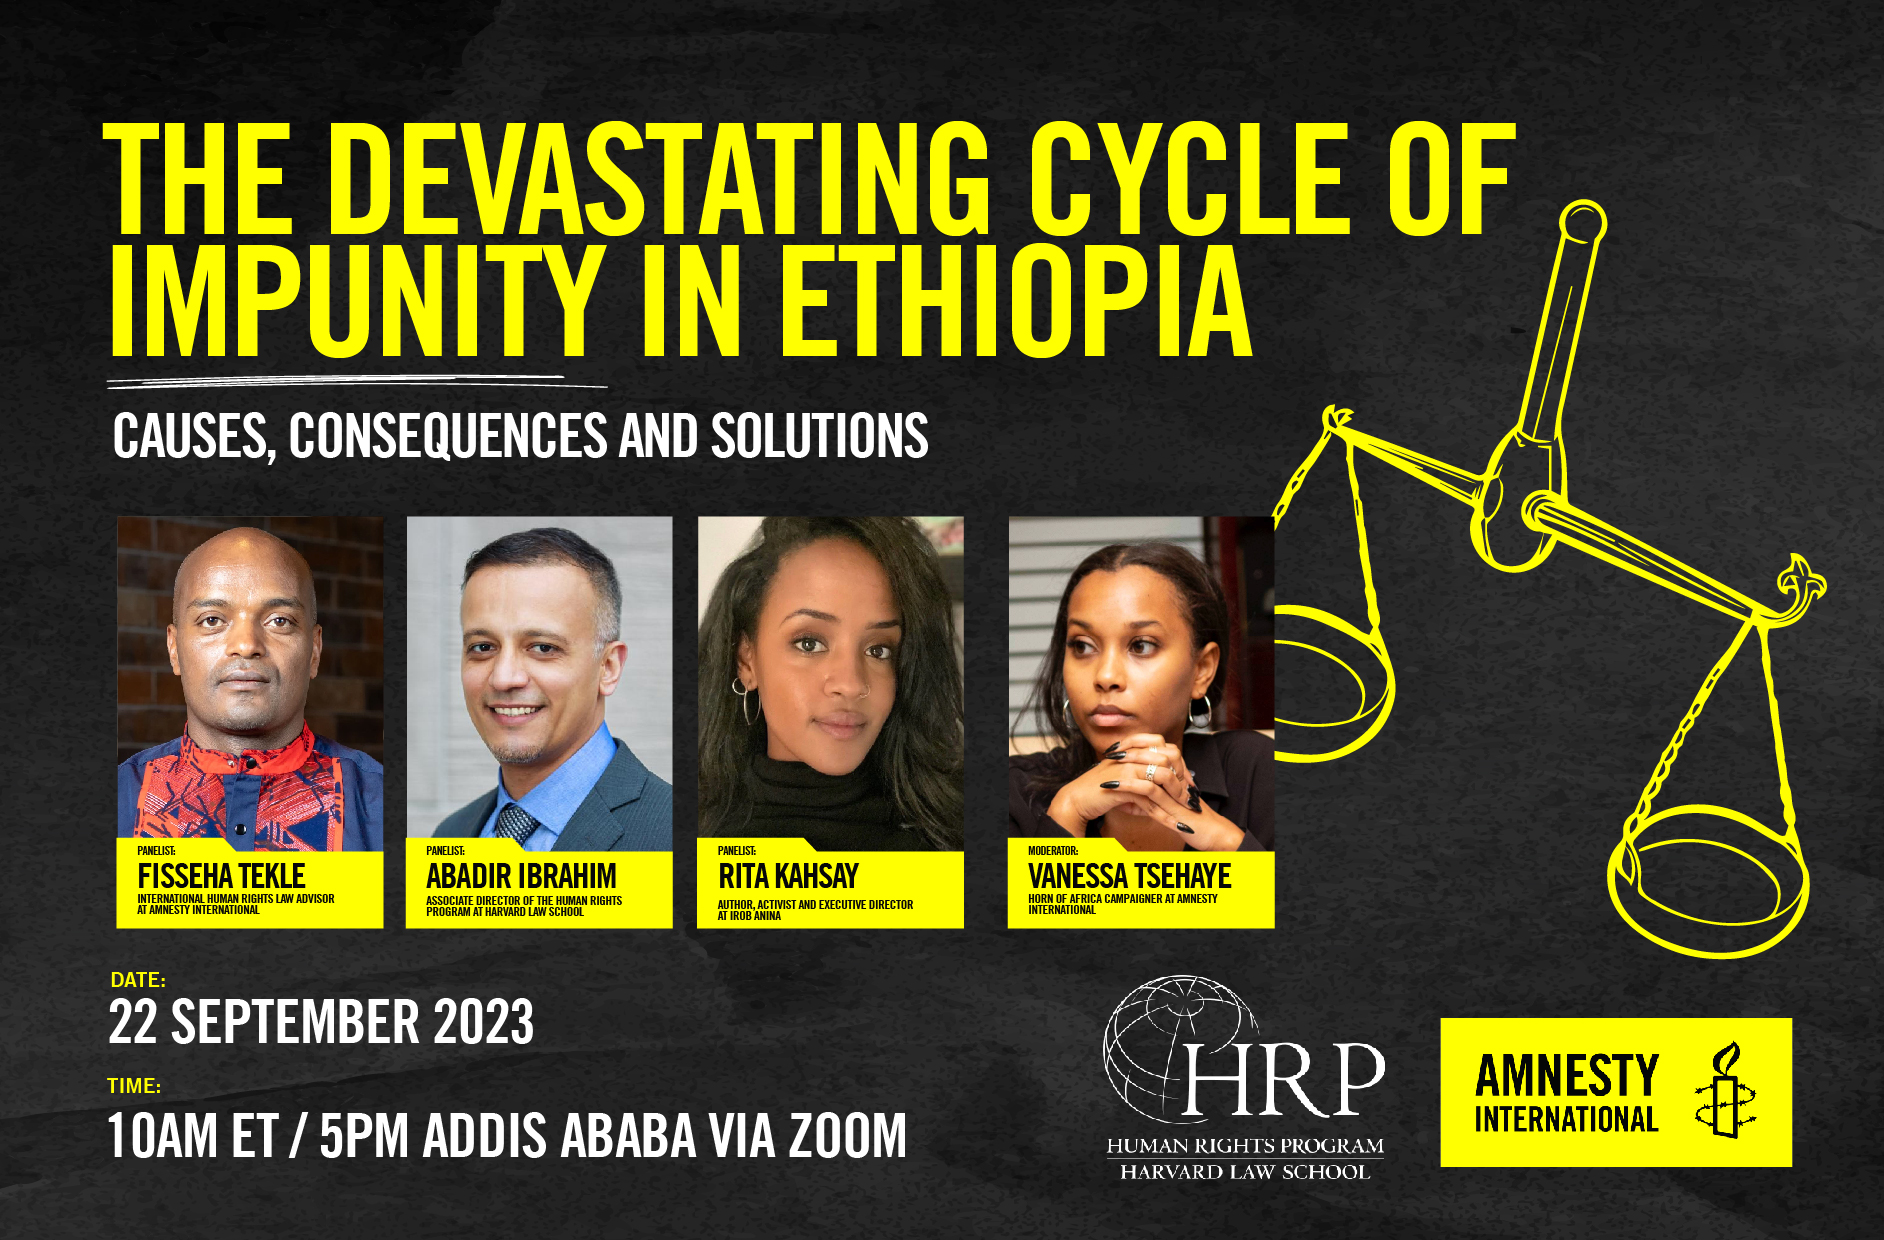 The Devastating Cycle of Impunity in Ethiopia: Causes, consequences and solutions.